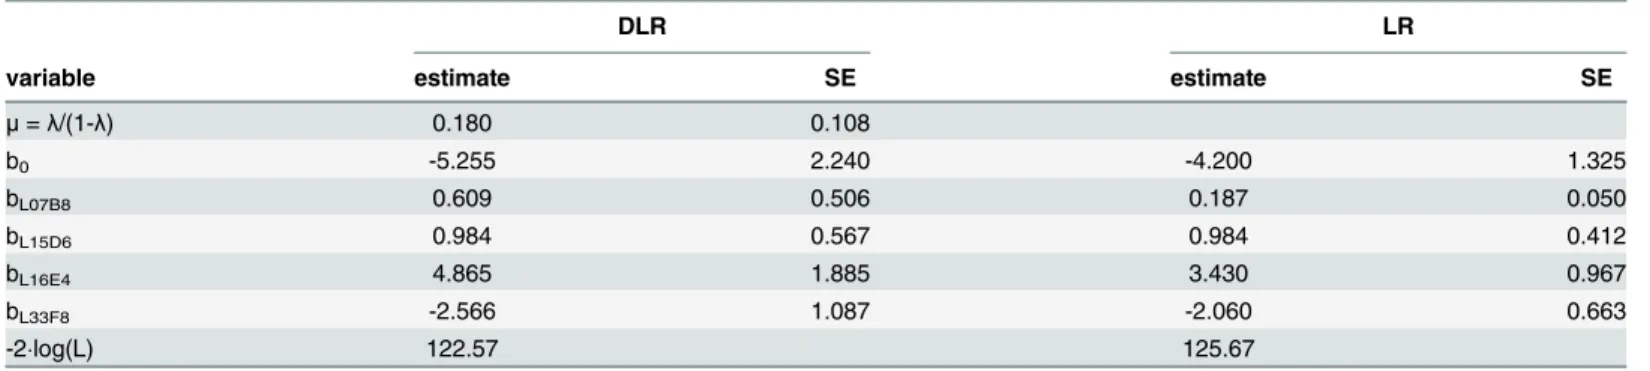 Table 2. Parameter estimates and their standard errors of DLR and LR estimation.